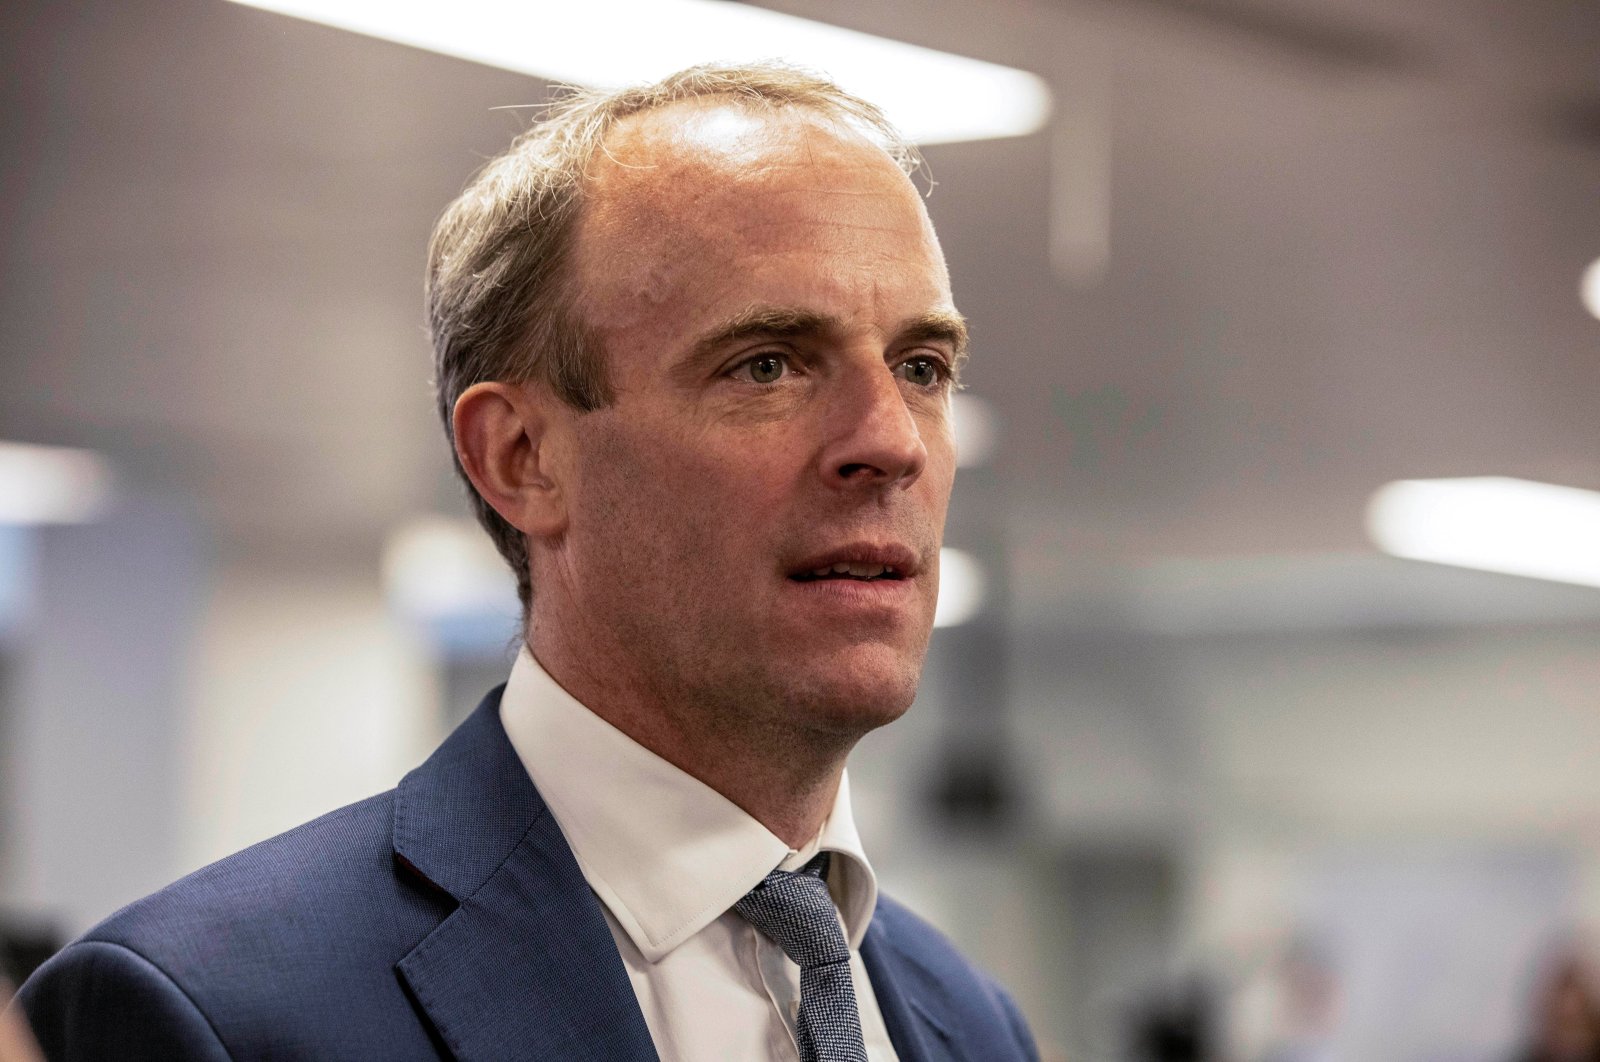 Britain's Foreign Secretary Dominic Raab looks on during a visit of Prime Minister Boris Johnson at the Foreign, Commonwealth and Development Office (FCDO) Crisis Center in London, U.K., Aug. 27, 2021. (Reuters Photo)